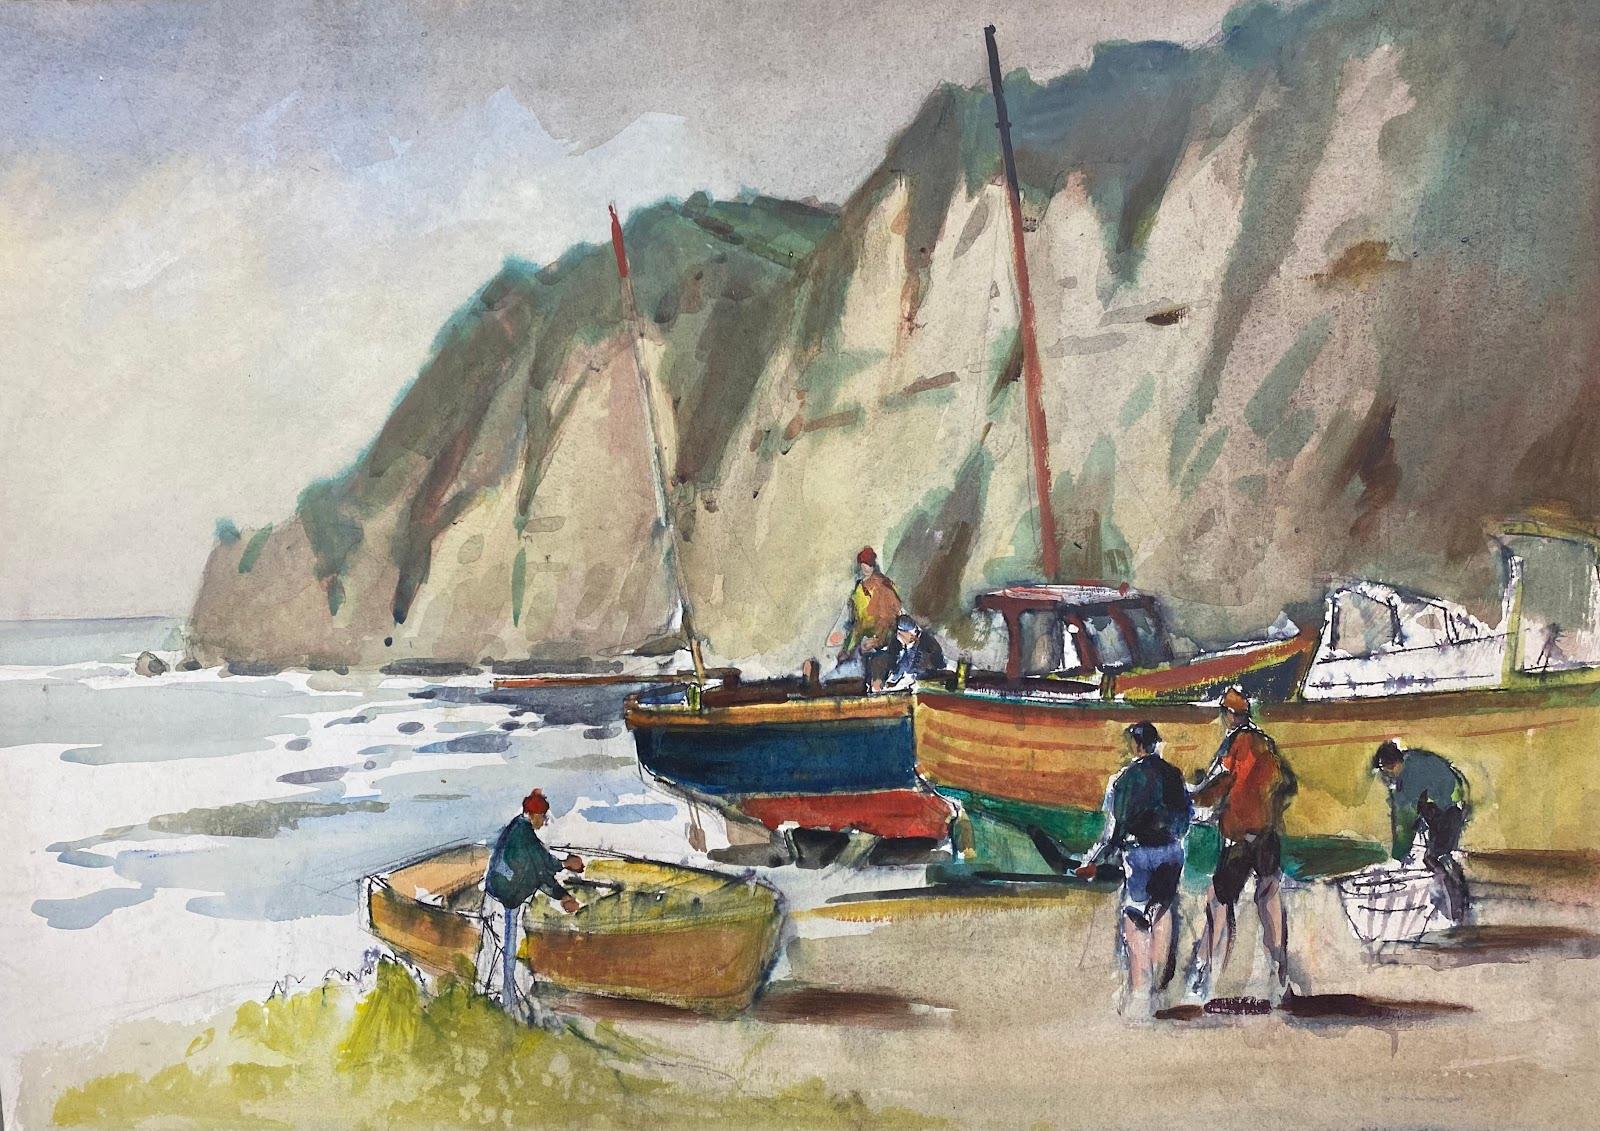 Frank Duffield Landscape Art - British Impressionist Painting Fishermen And Boats On The Beach